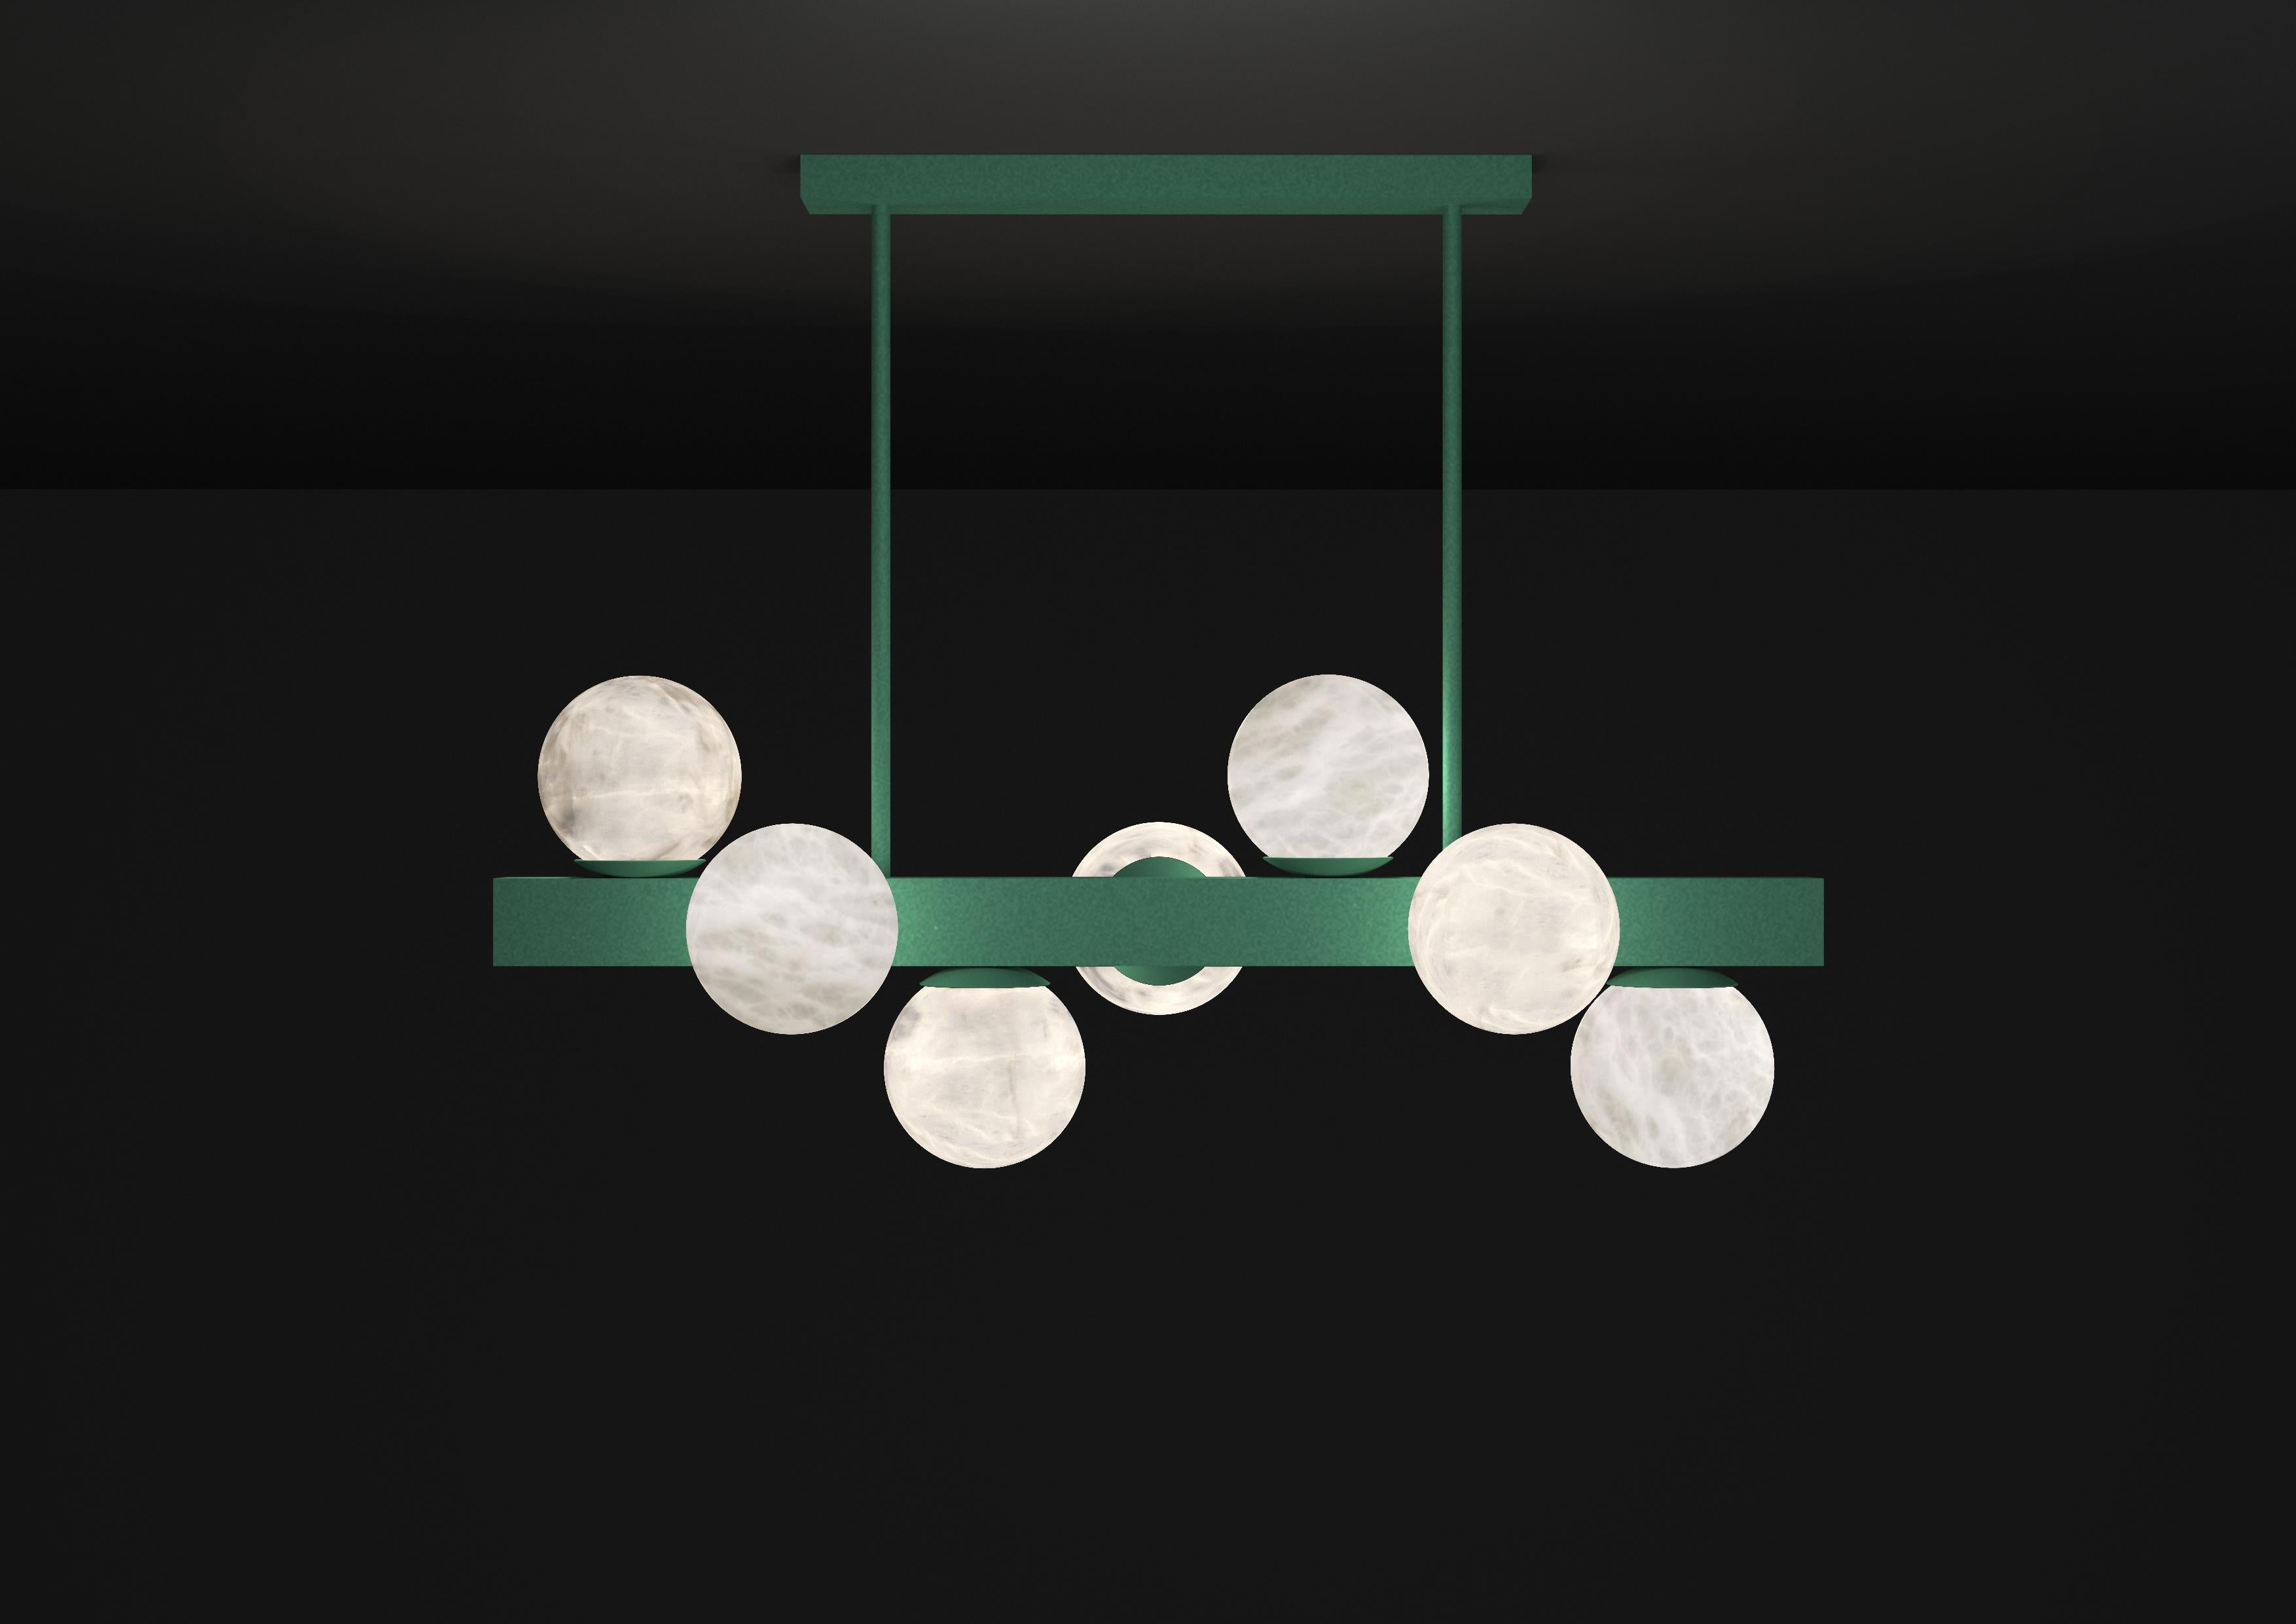 Dioniso Freedom Green Metal Pendant Lamp by Alabastro Italiano
Dimensions: D 35 x W 91 x H 36 cm.
Materials: White alabaster and metal.

Available in different finishes: Shiny Silver, Bronze, Brushed Brass, Ruggine of Florence, Brushed Burnished,